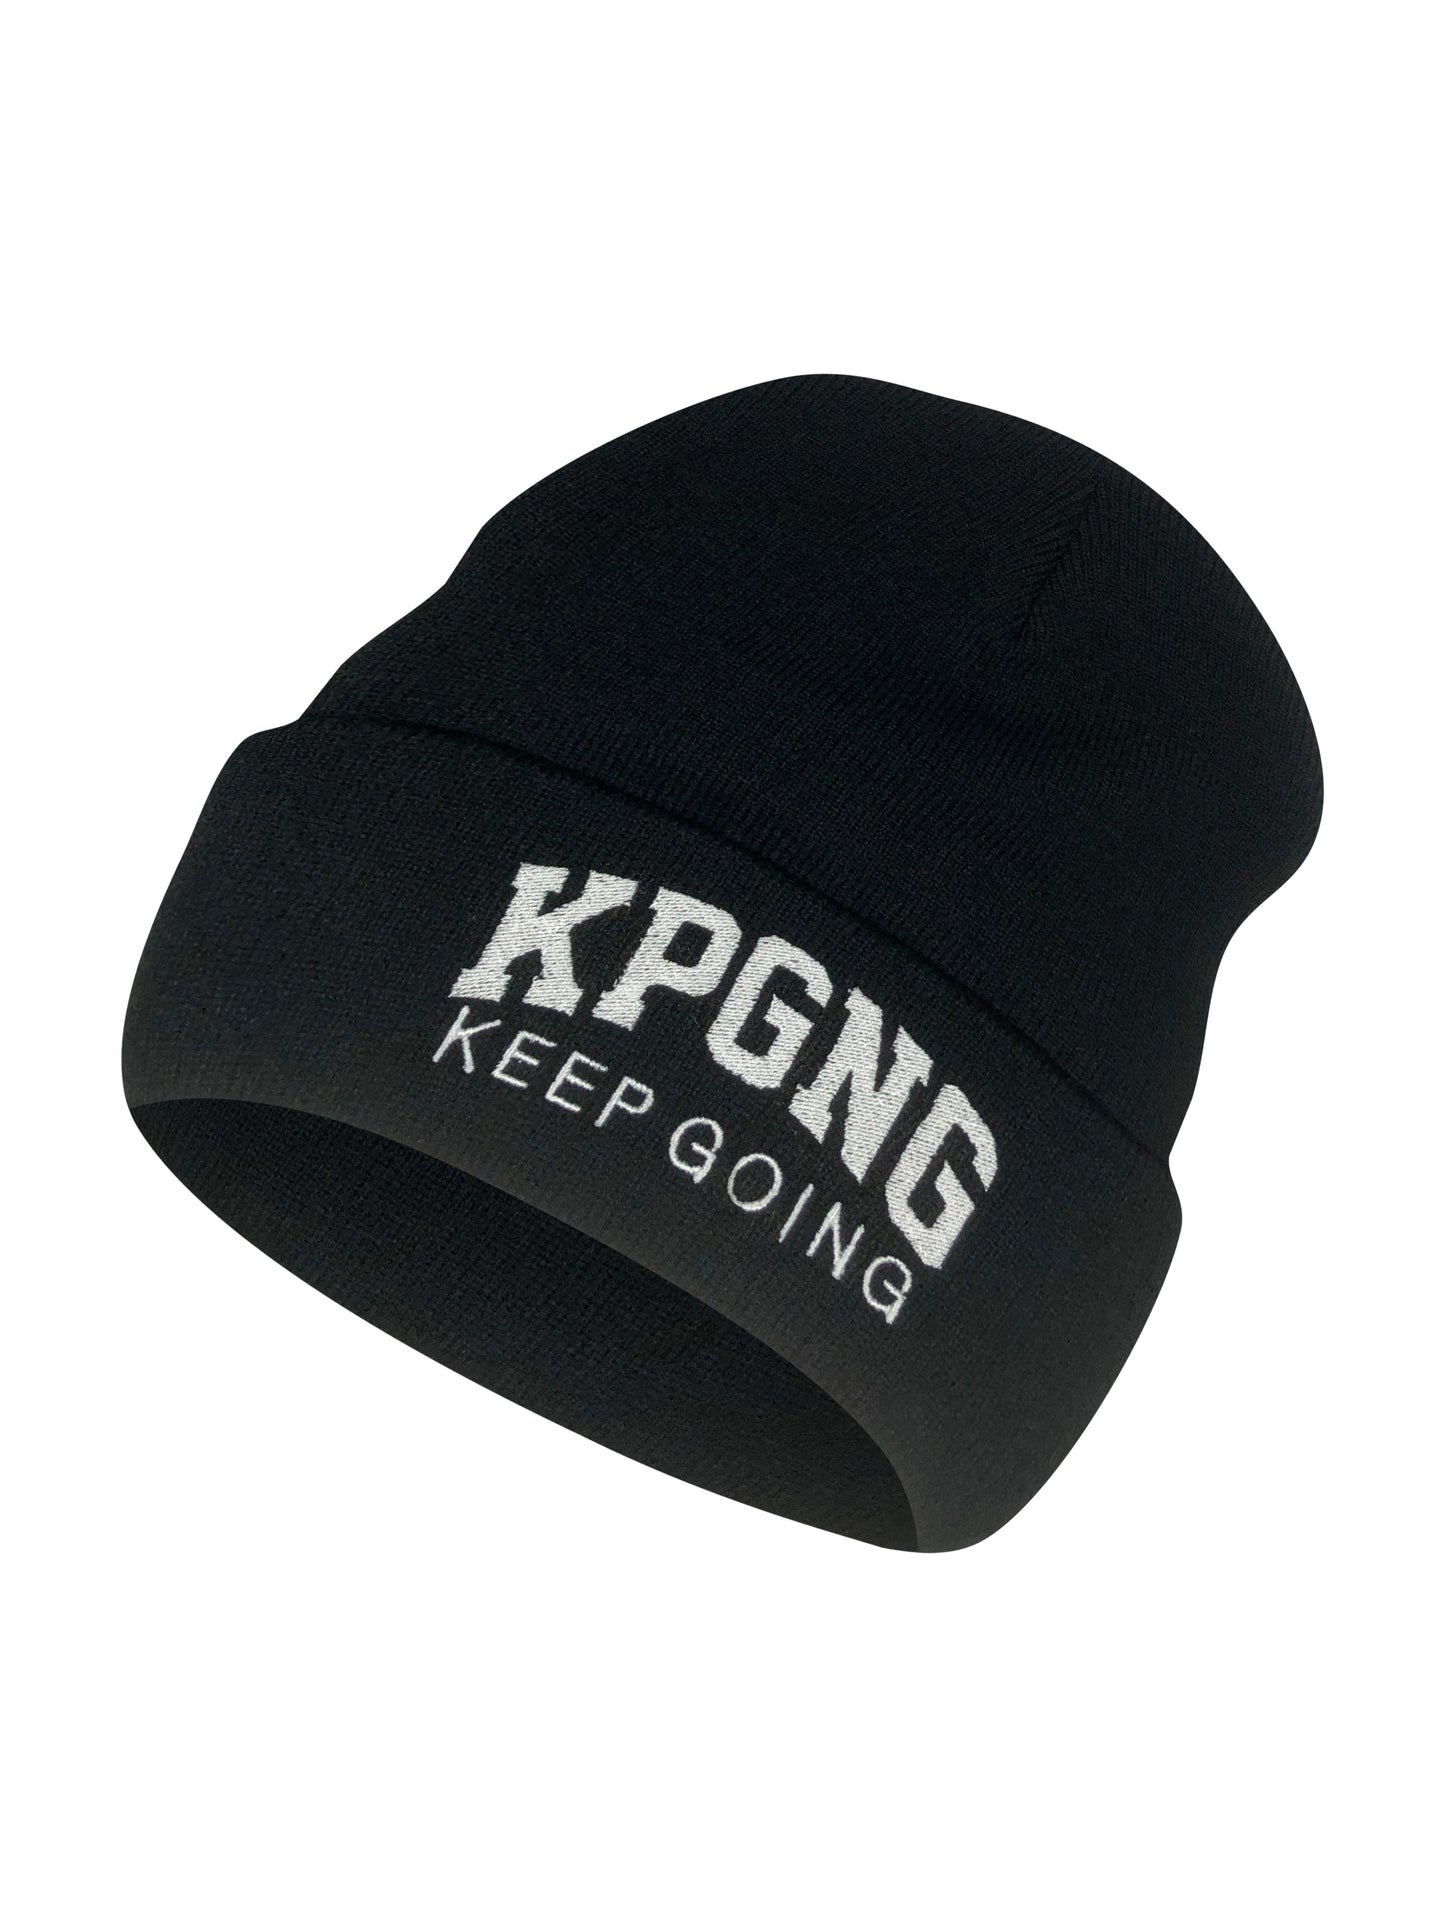 black beanie showing logo to the side